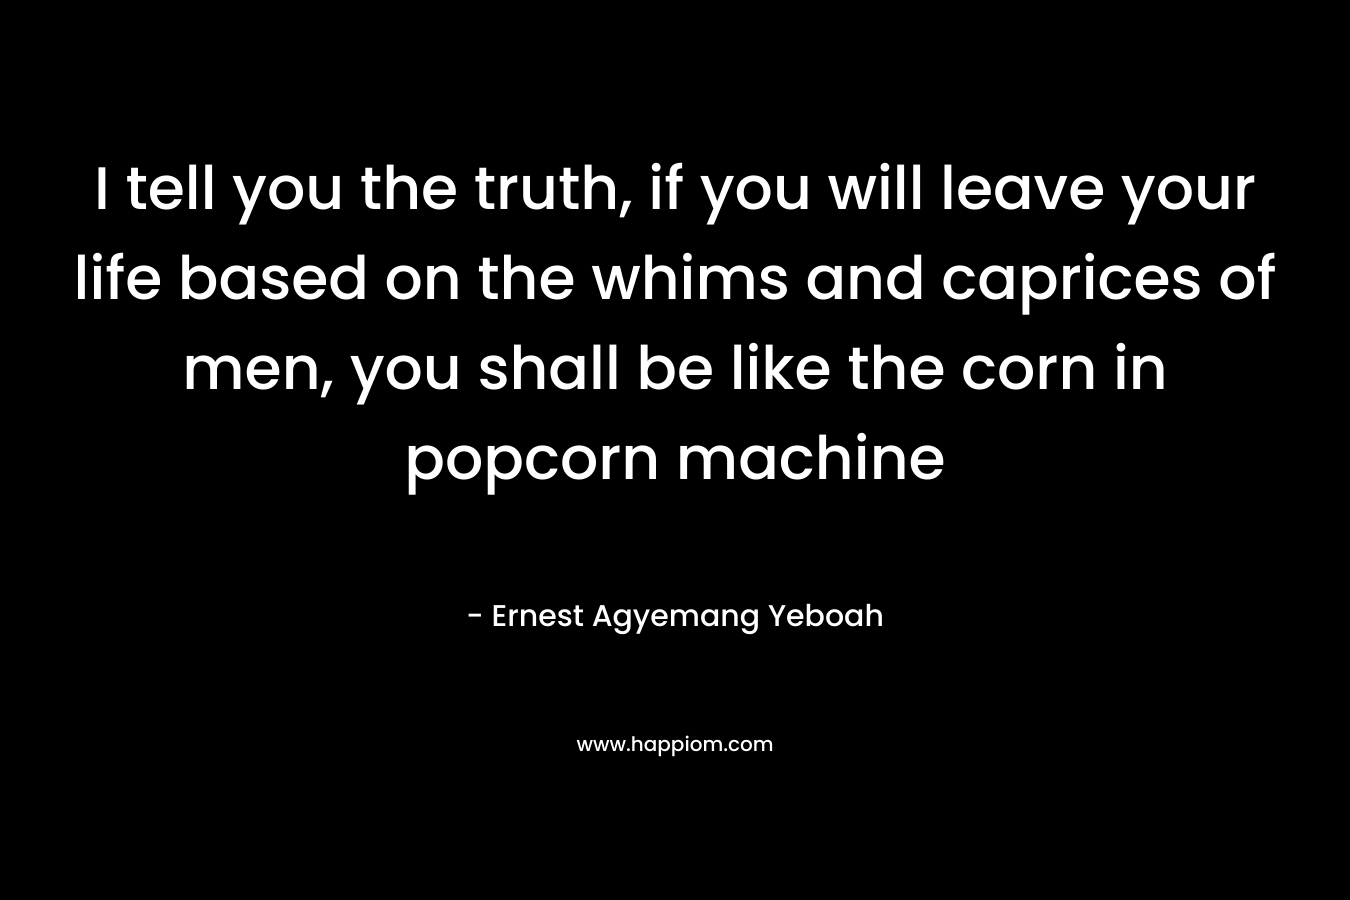 I tell you the truth, if you will leave your life based on the whims and caprices of men, you shall be like the corn in popcorn machine – Ernest Agyemang Yeboah